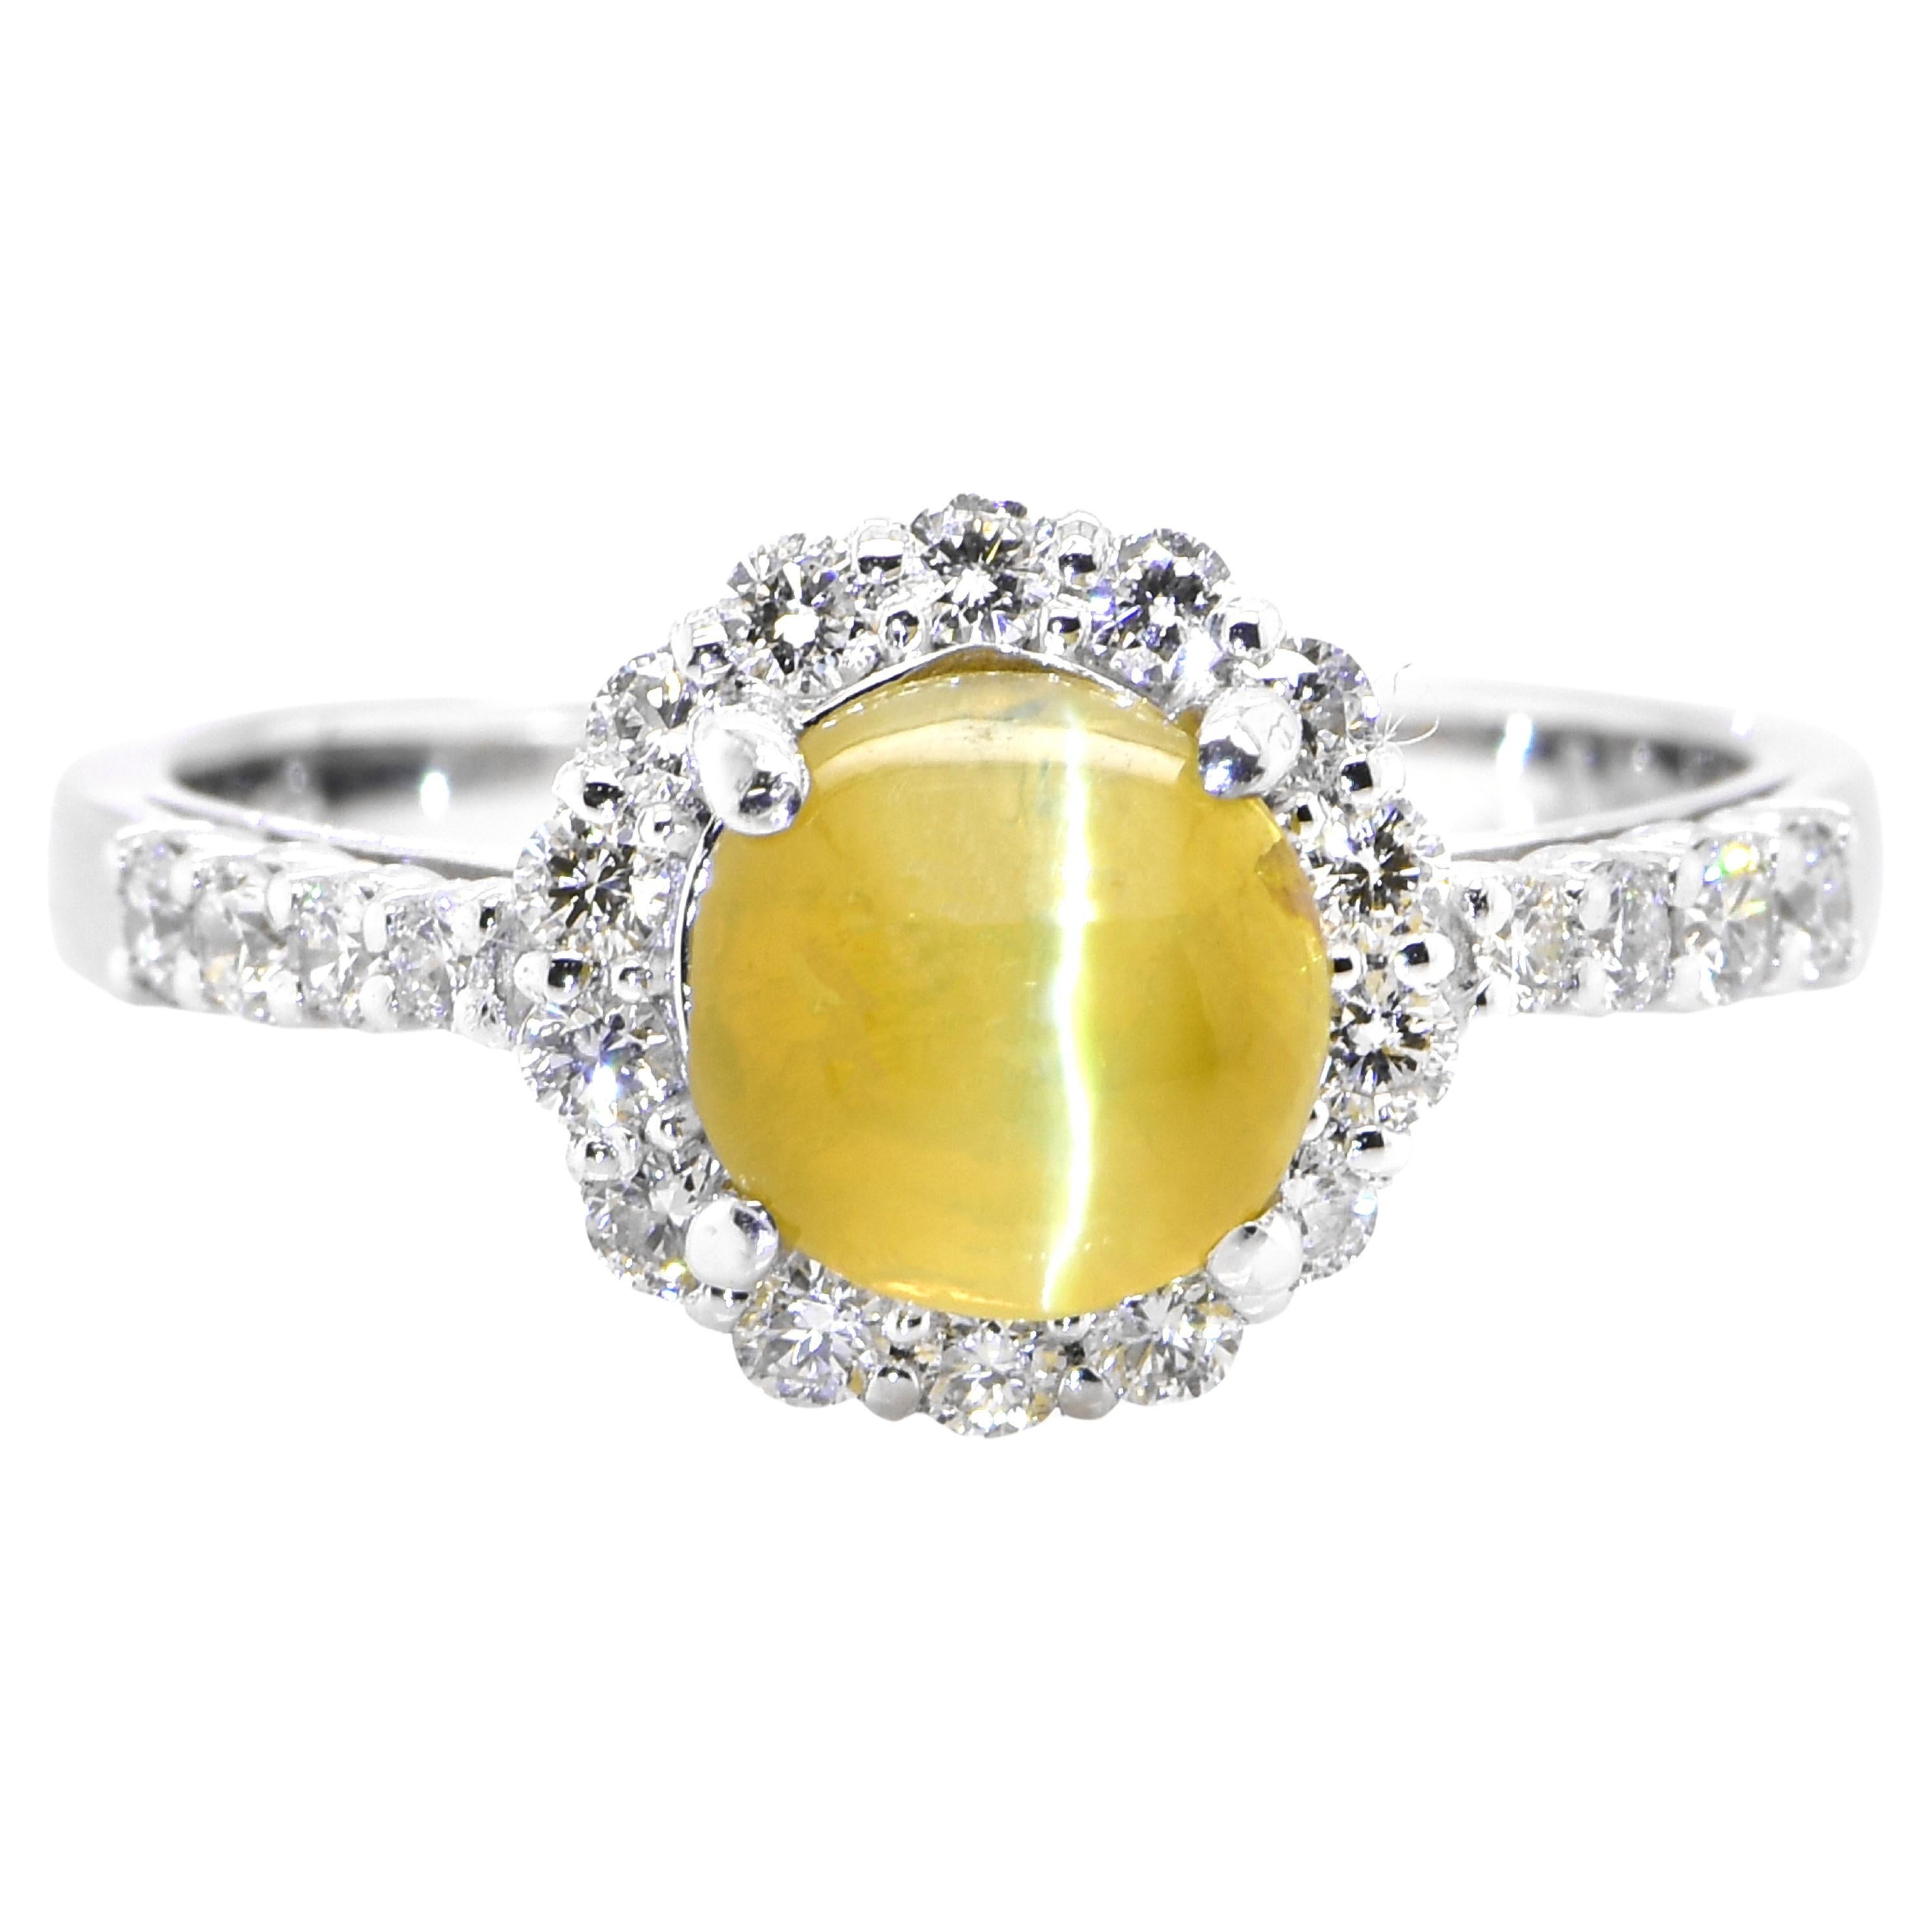 2.29 Carat 'Honey-Color' Cat's Eye Chrysoberyl and Diamond Ring Set in Platinum For Sale